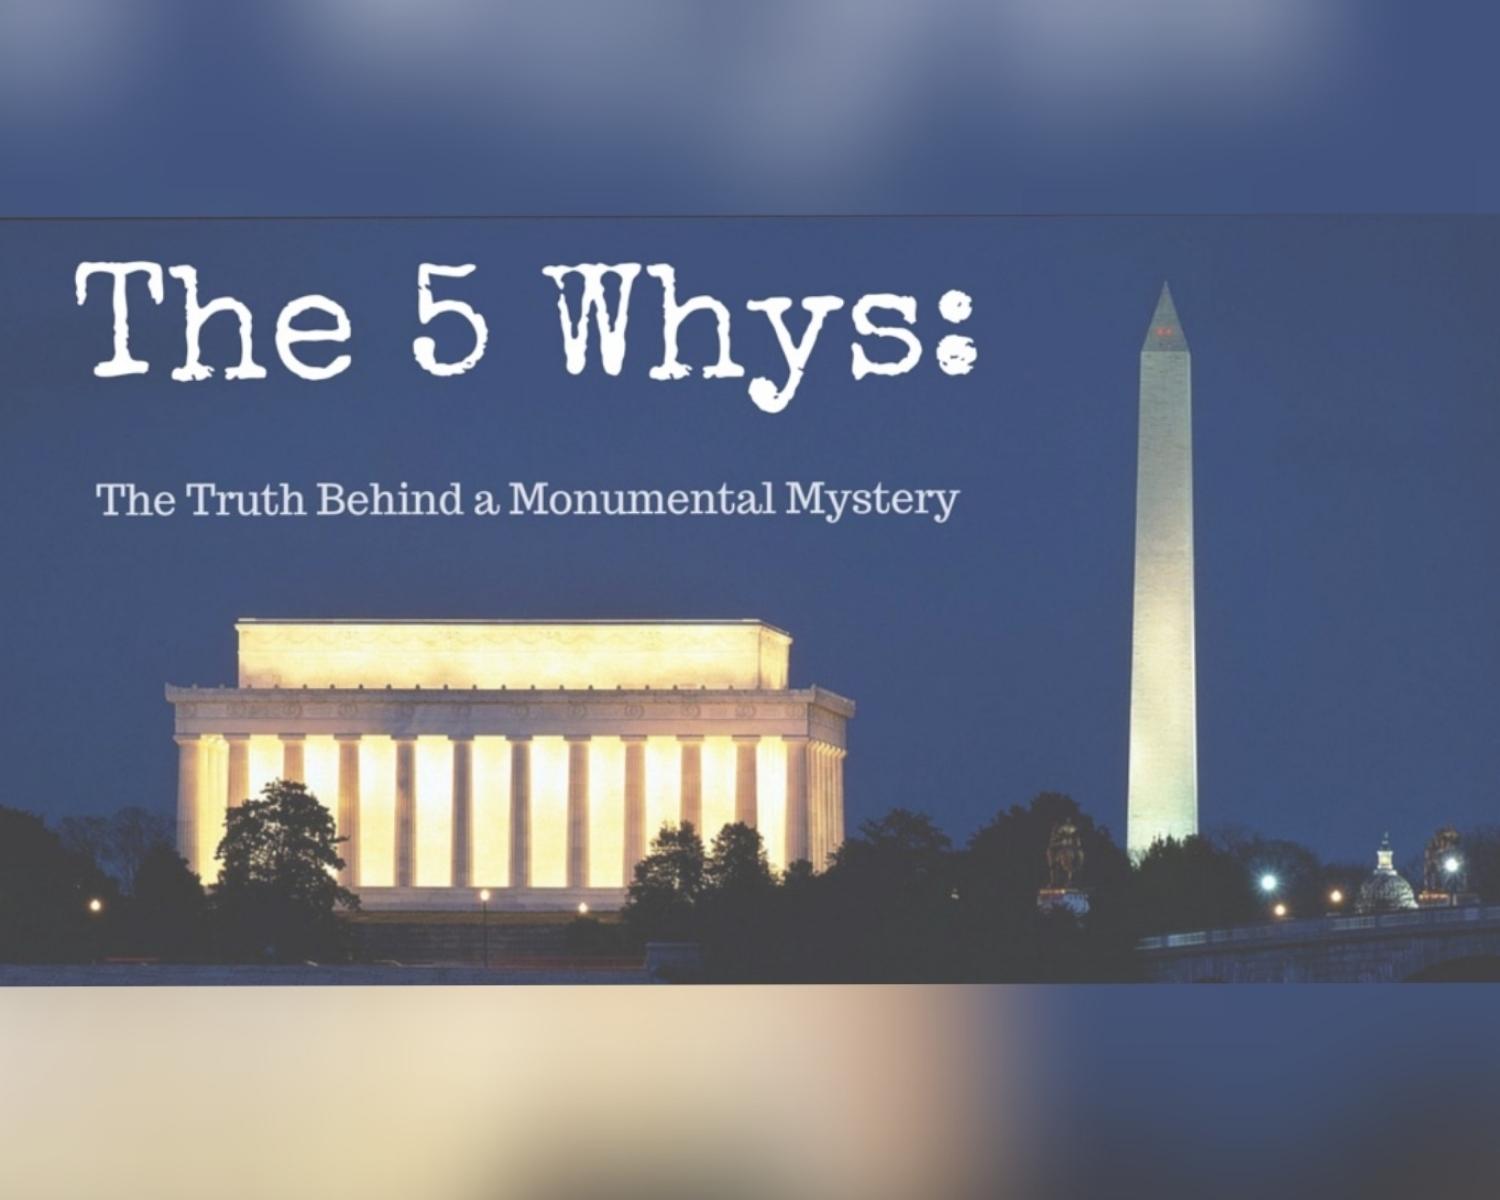 Saving The Washington Monument: Second Of Five Whys